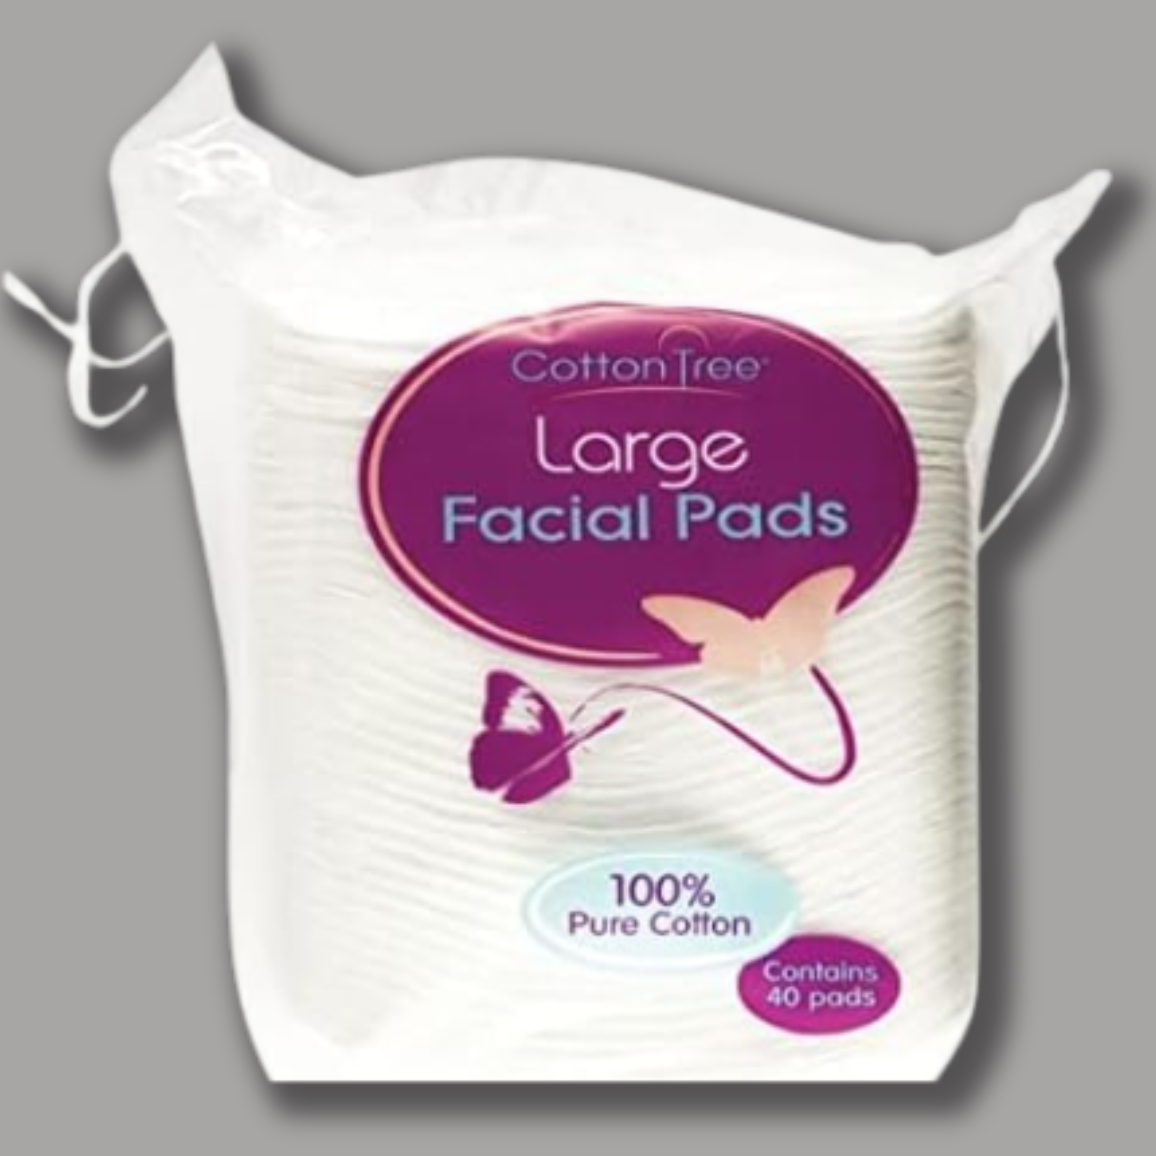 Pack of 40 Large Oval Cotton Wool Pads